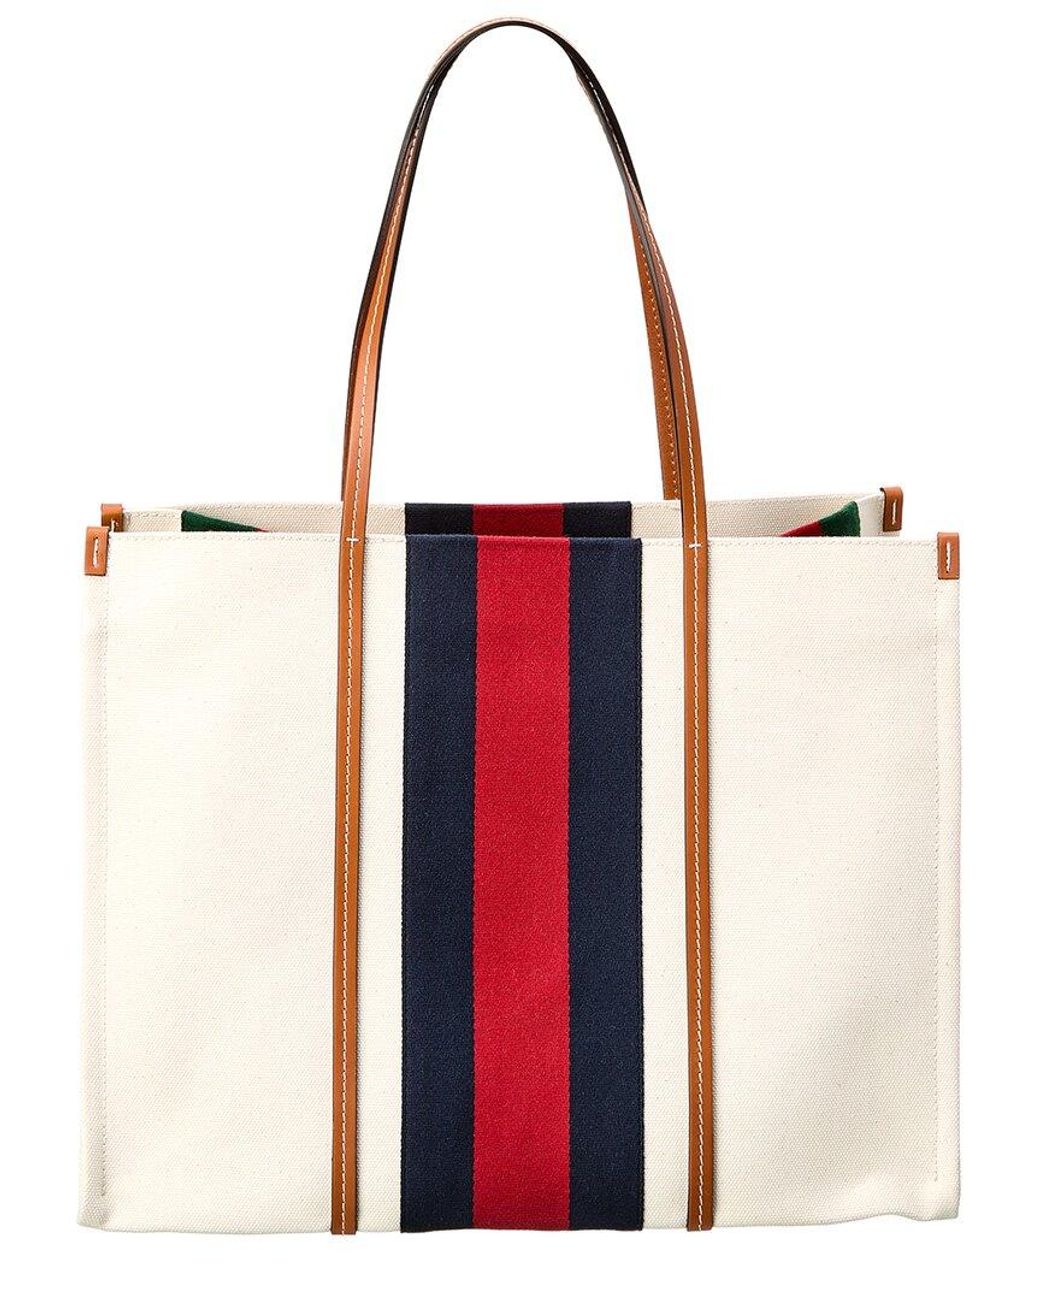 NWT Clare V Leather Navy Stripe tote